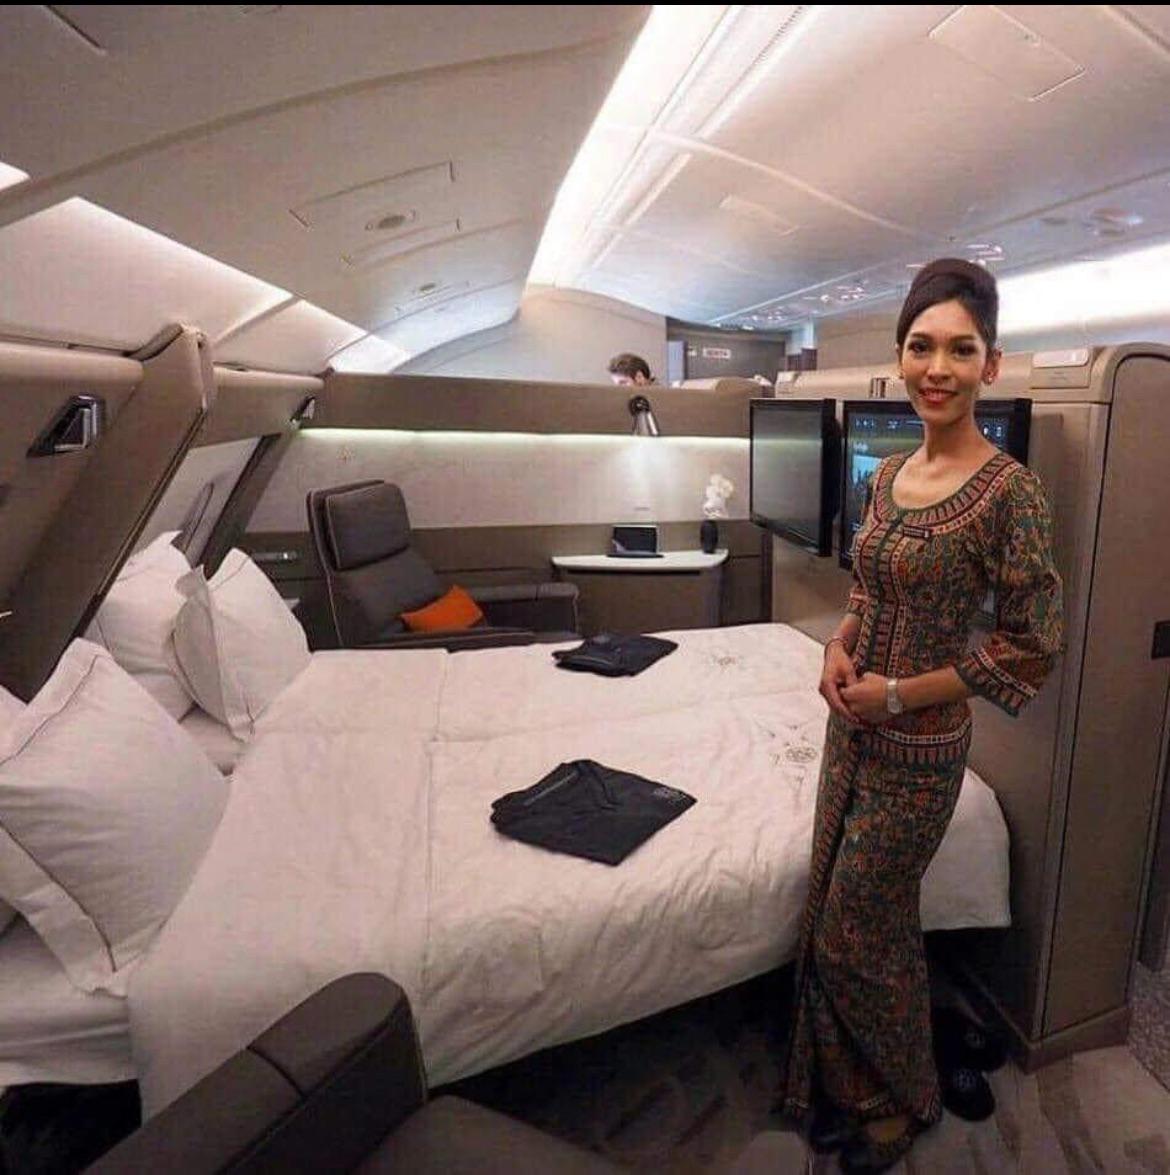 Singapore airlines first class.jpeg